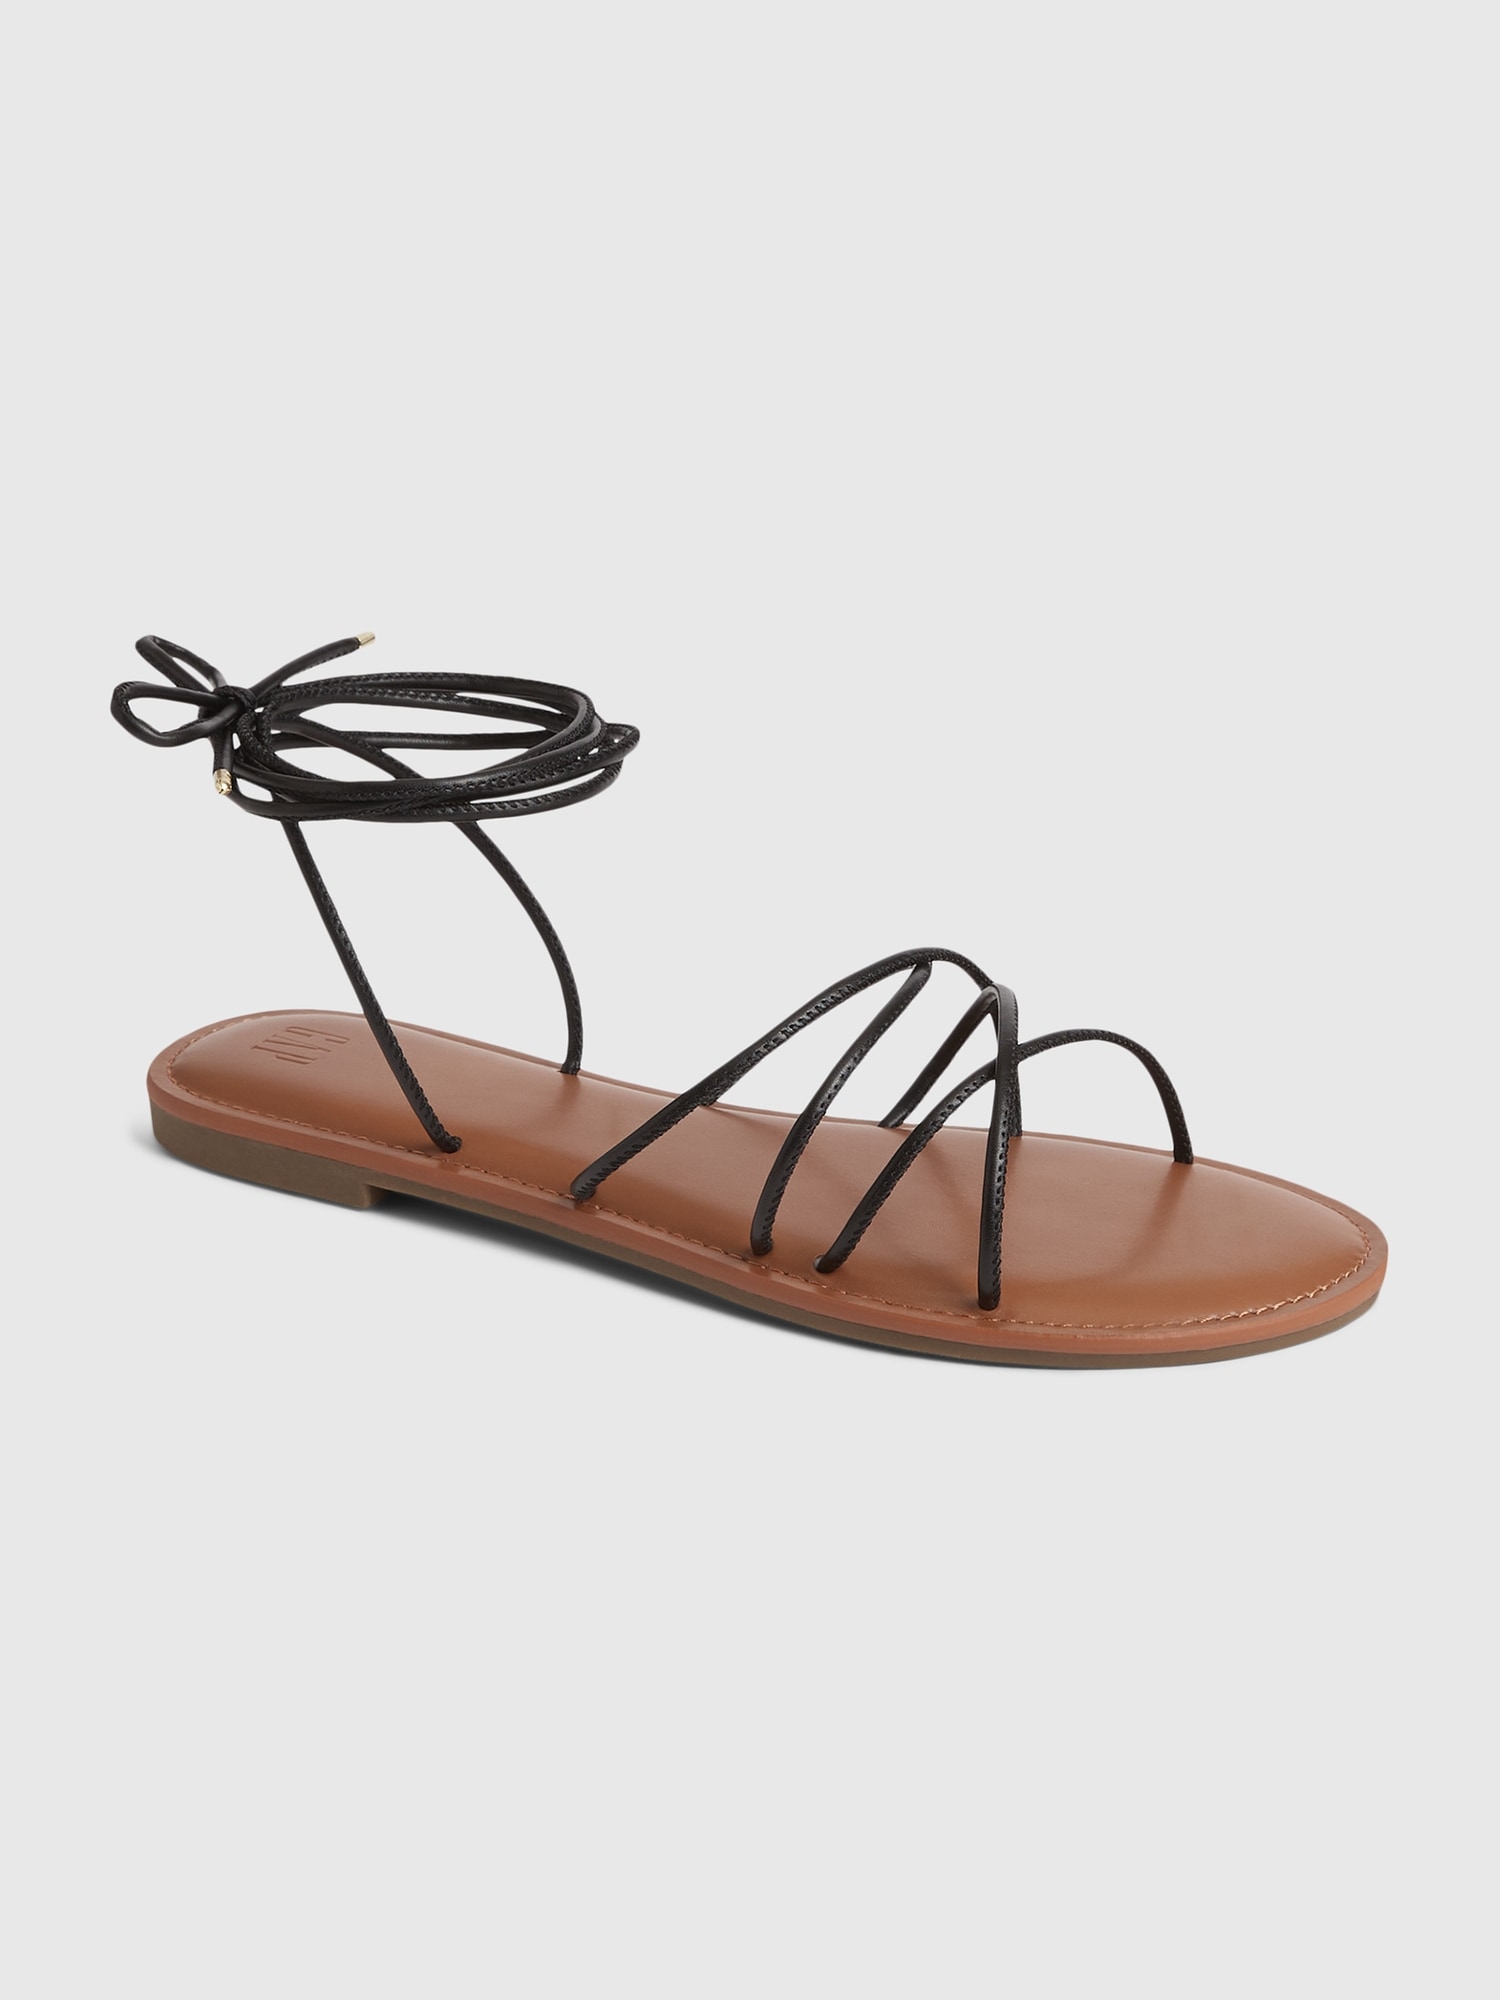 Gap Strappy Lace-Up Sandals black. 1